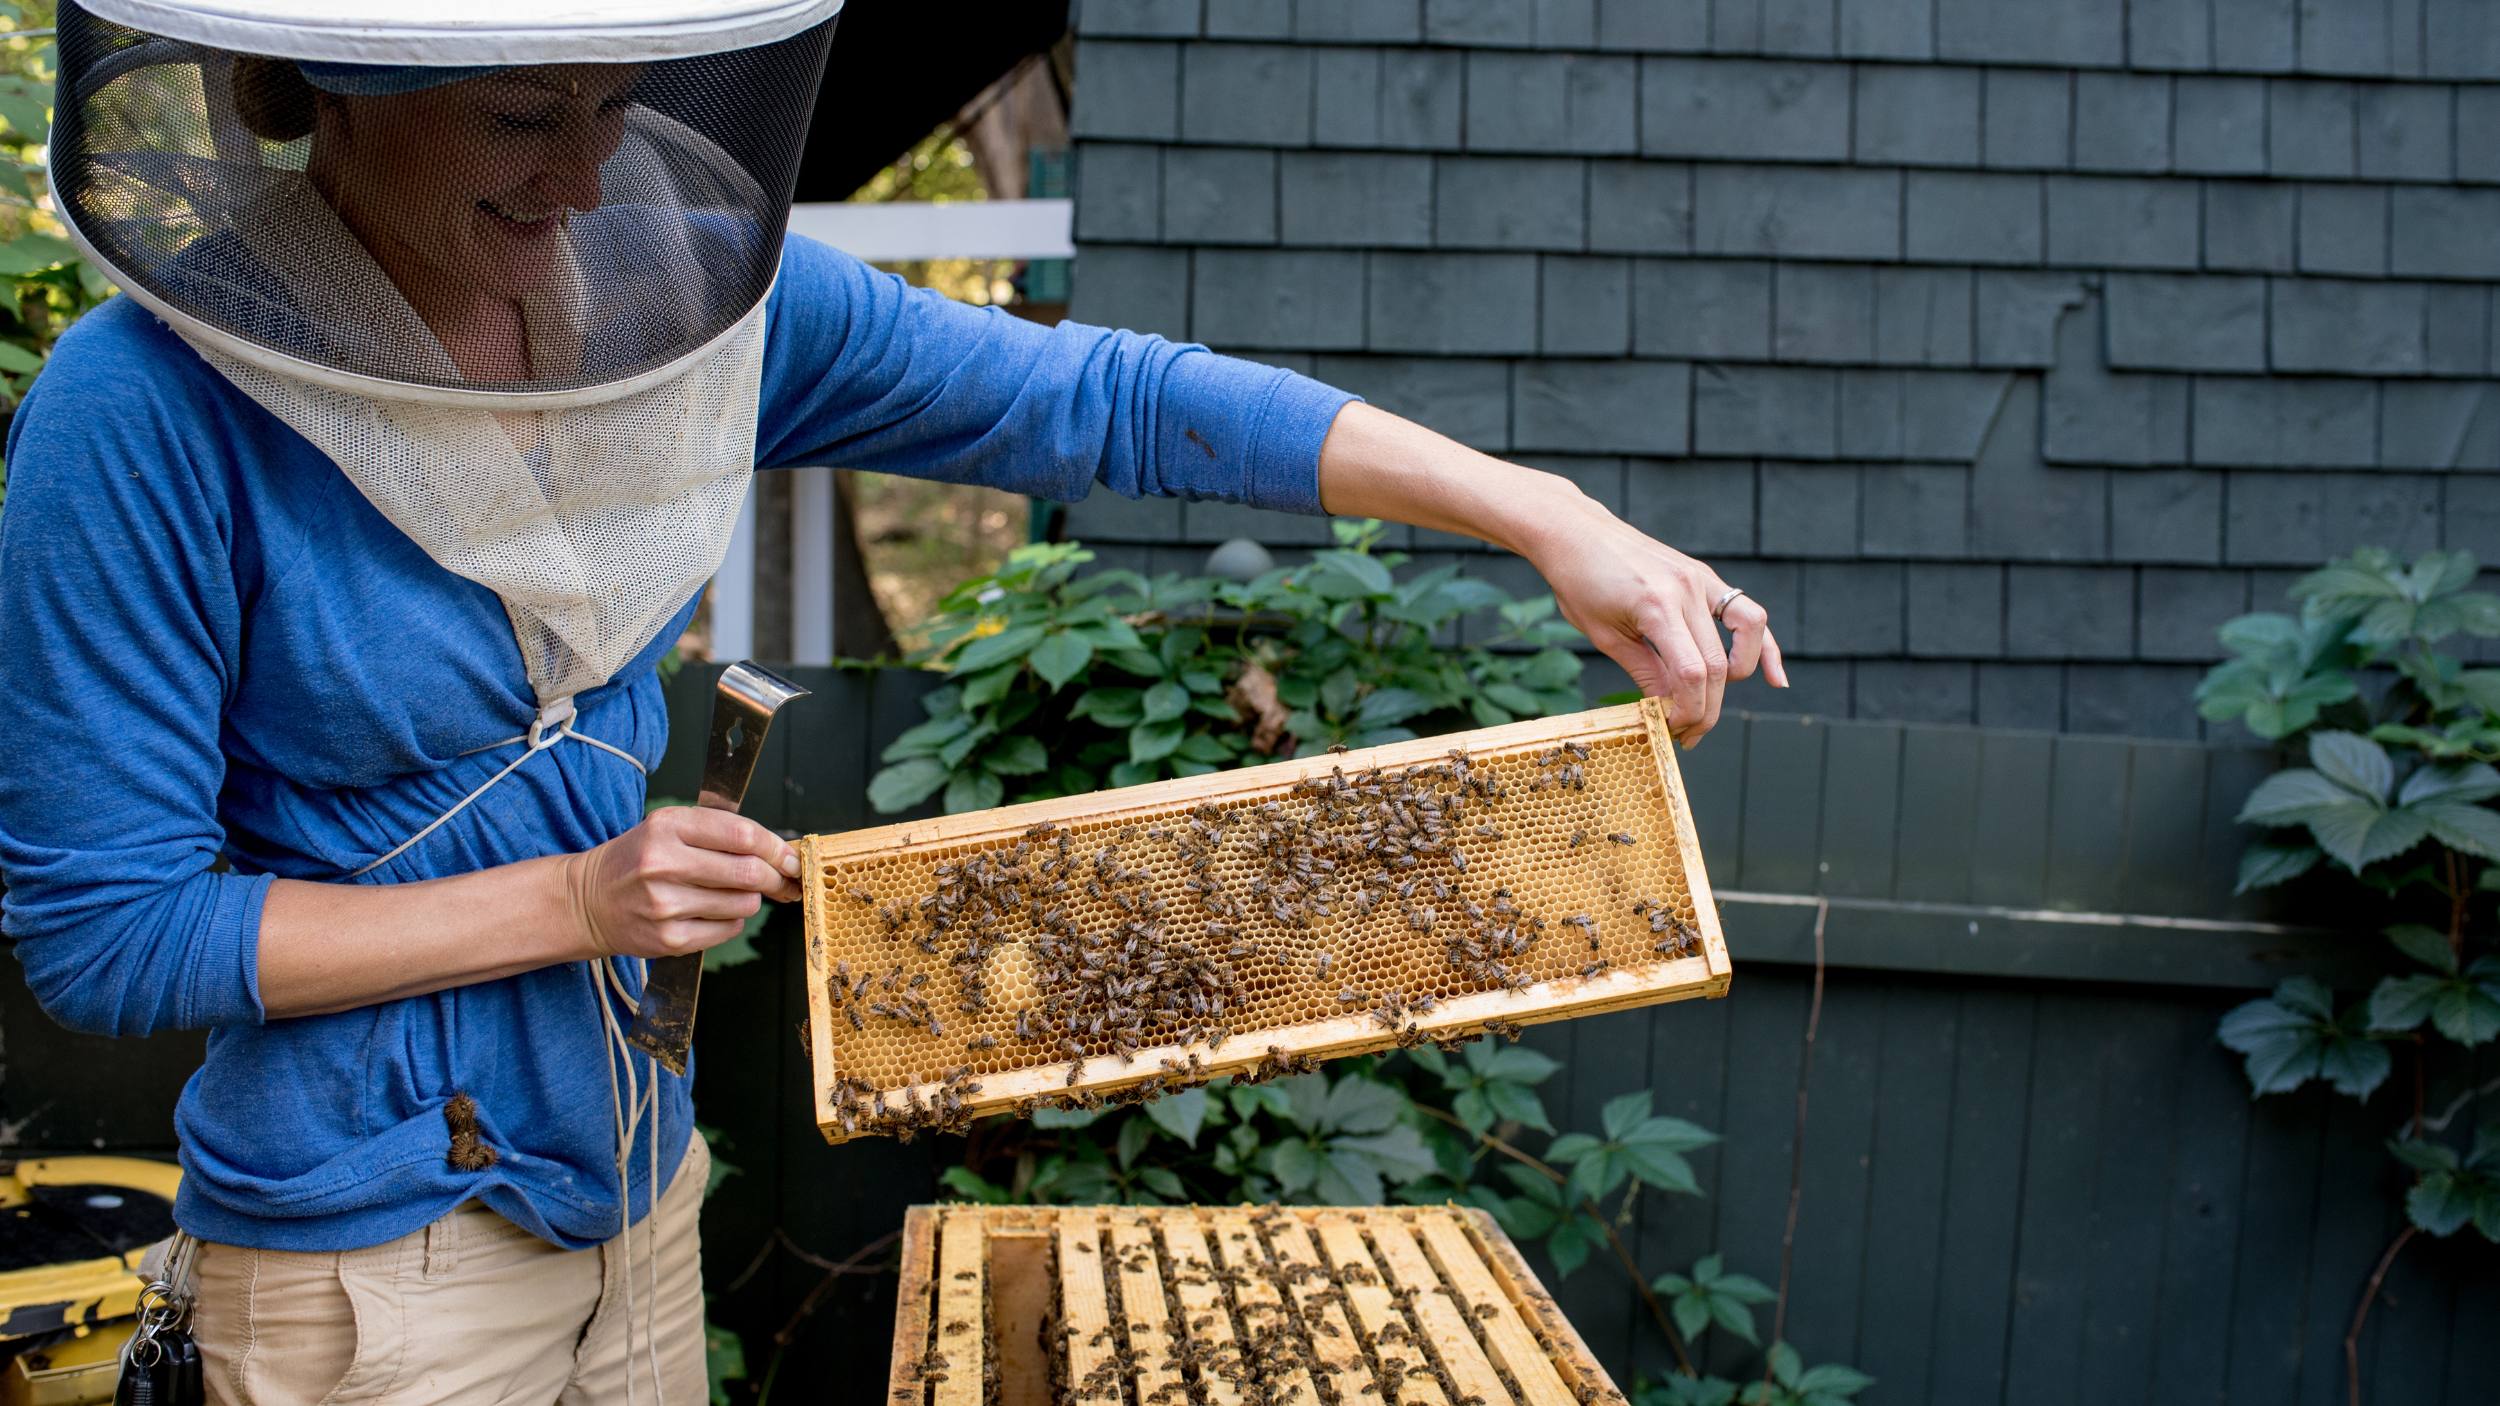 Champlain Apiary Buzzes With Experiential Learning